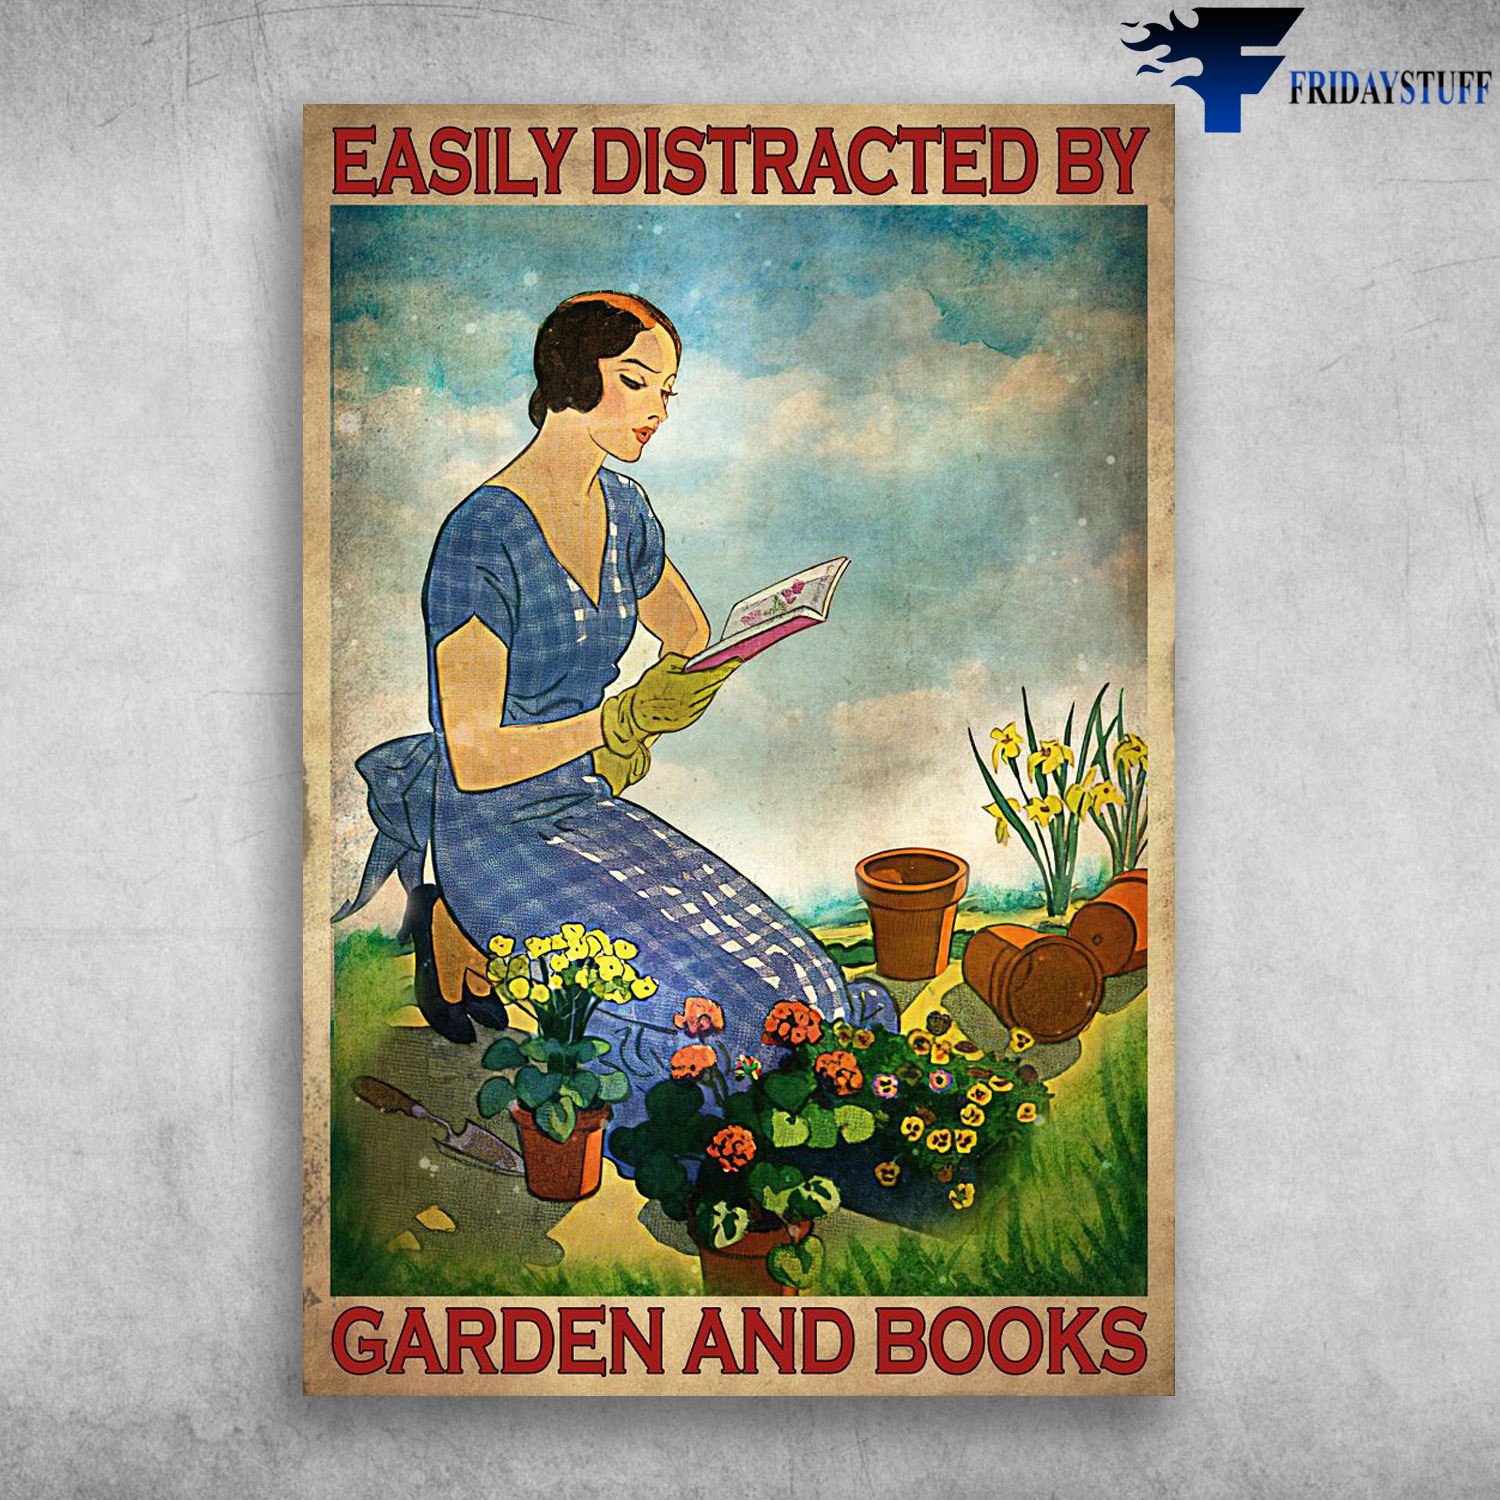 Girl Loves Book And Garden - Easily Distracted, By Garden And Books